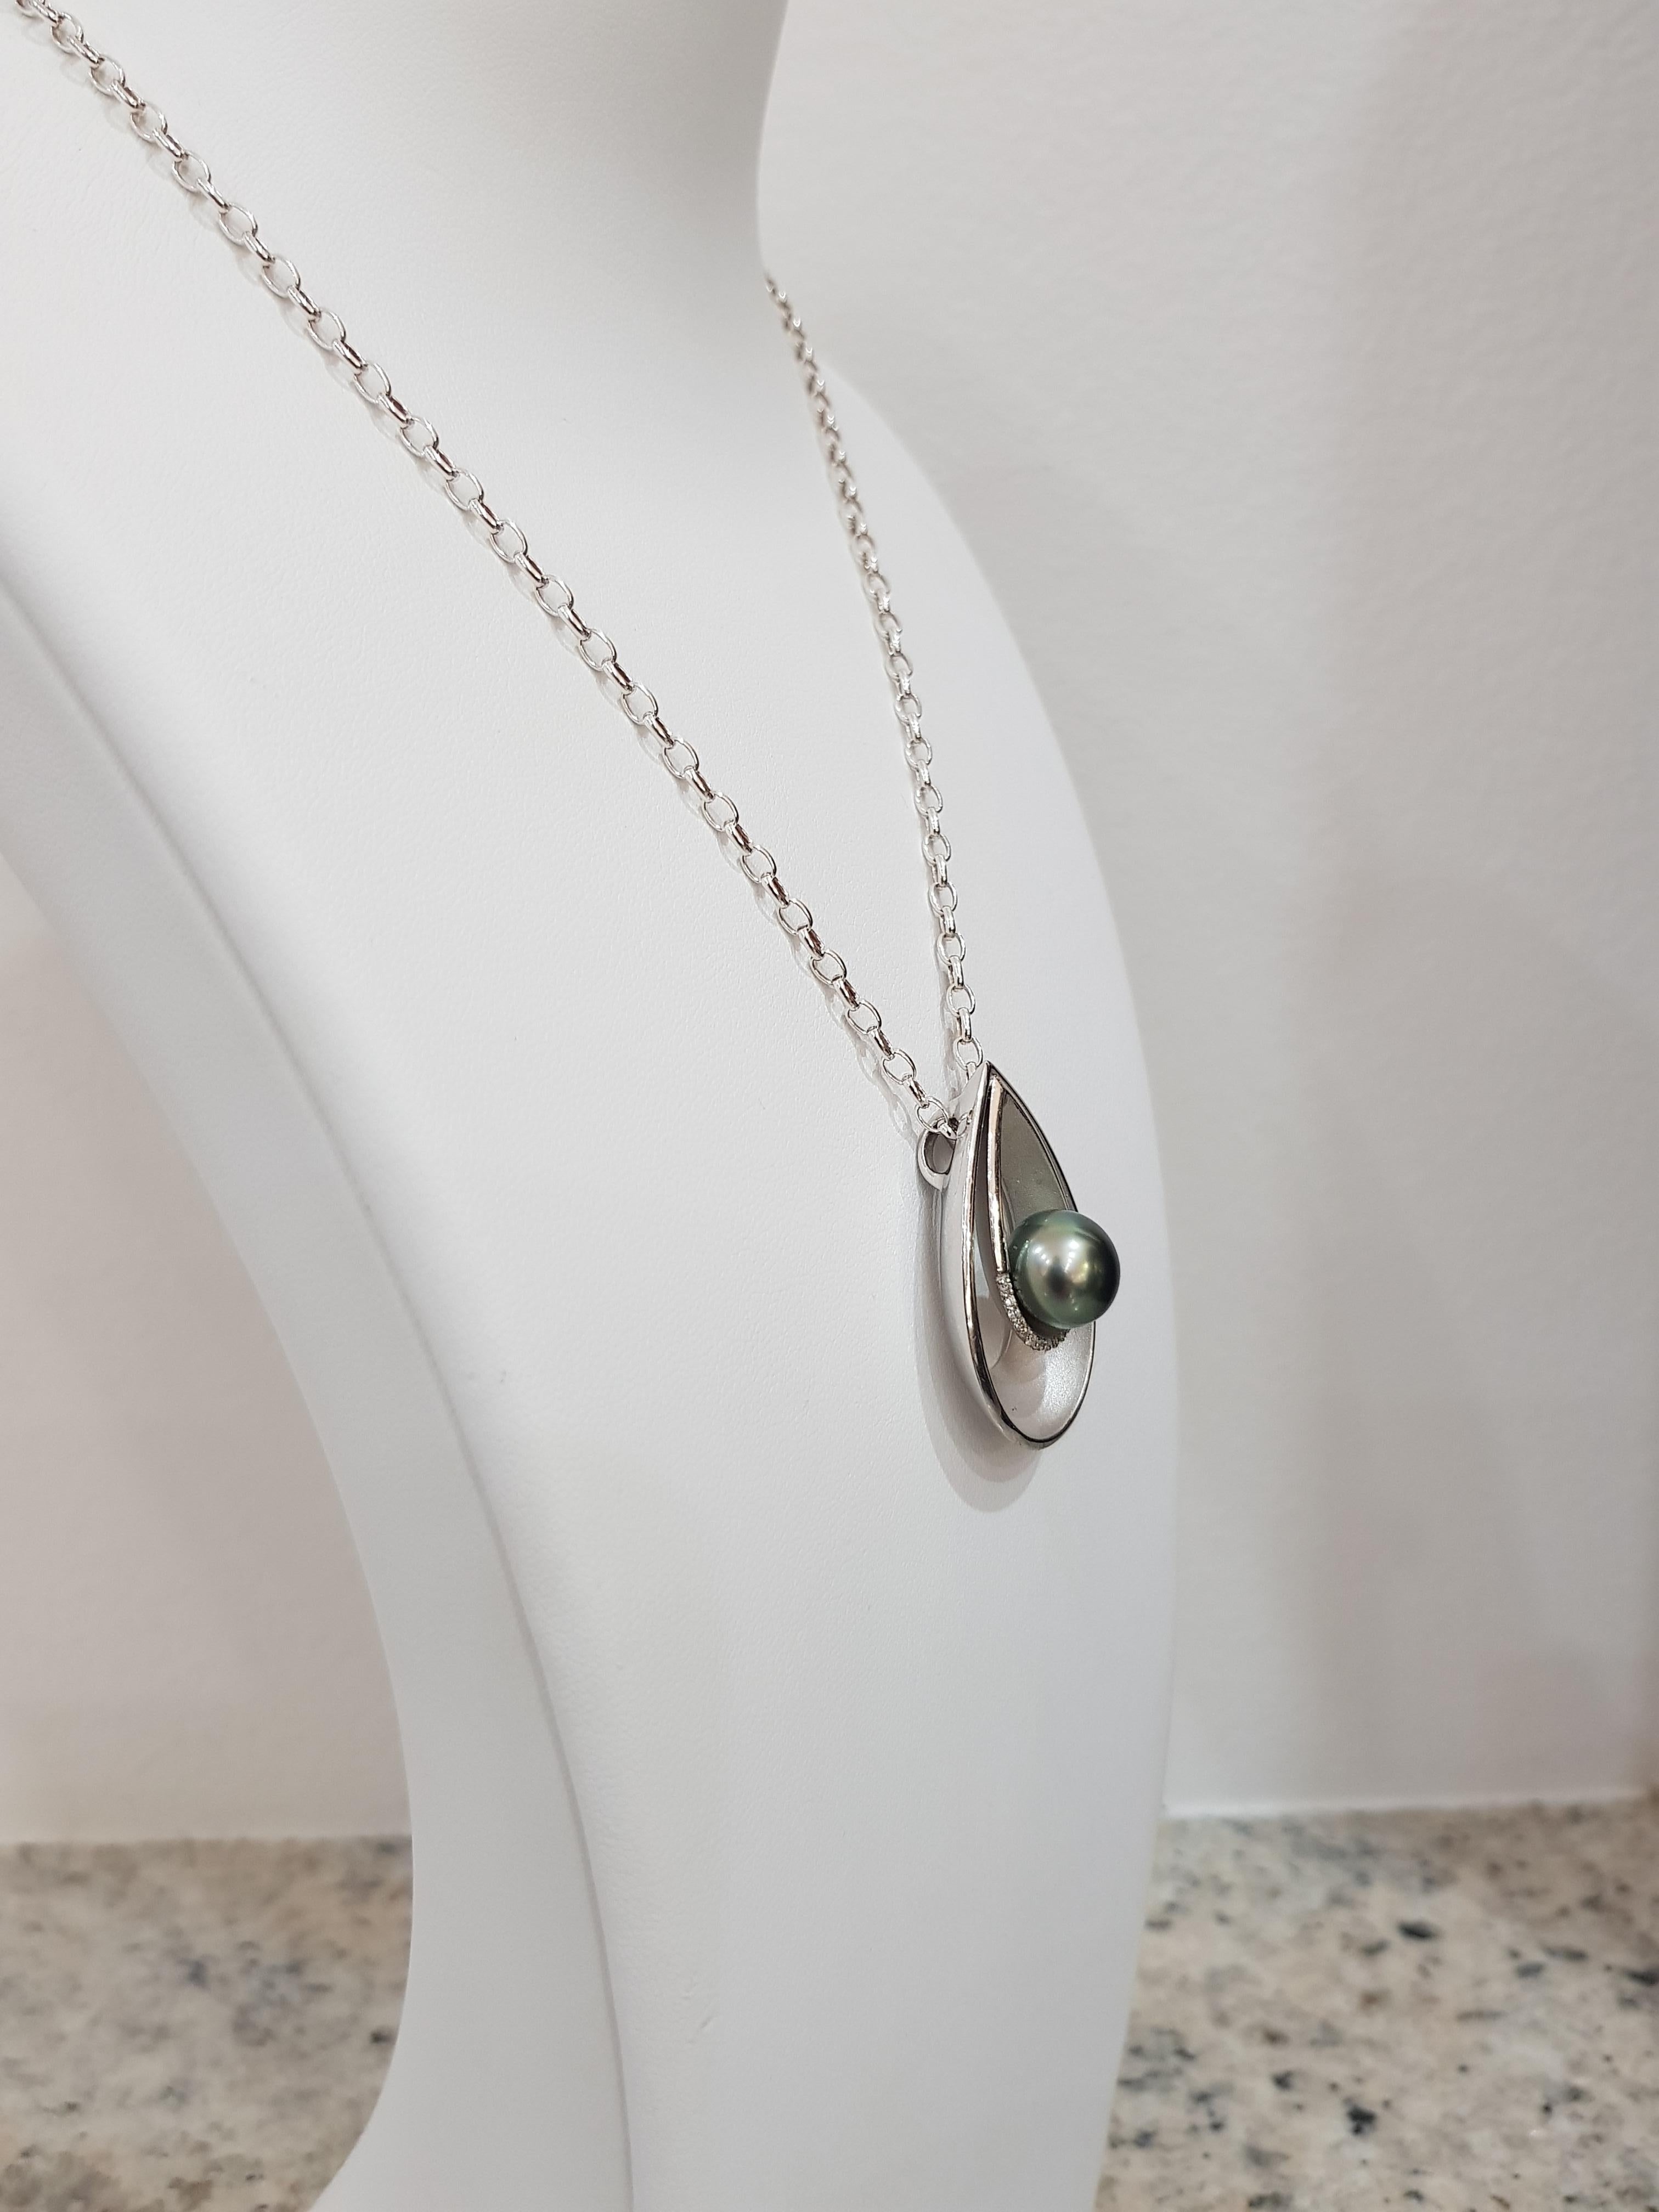 9 Carat White Gold Tahitian South Sea Pearl Pendant In New Condition For Sale In Broome, Western Australia